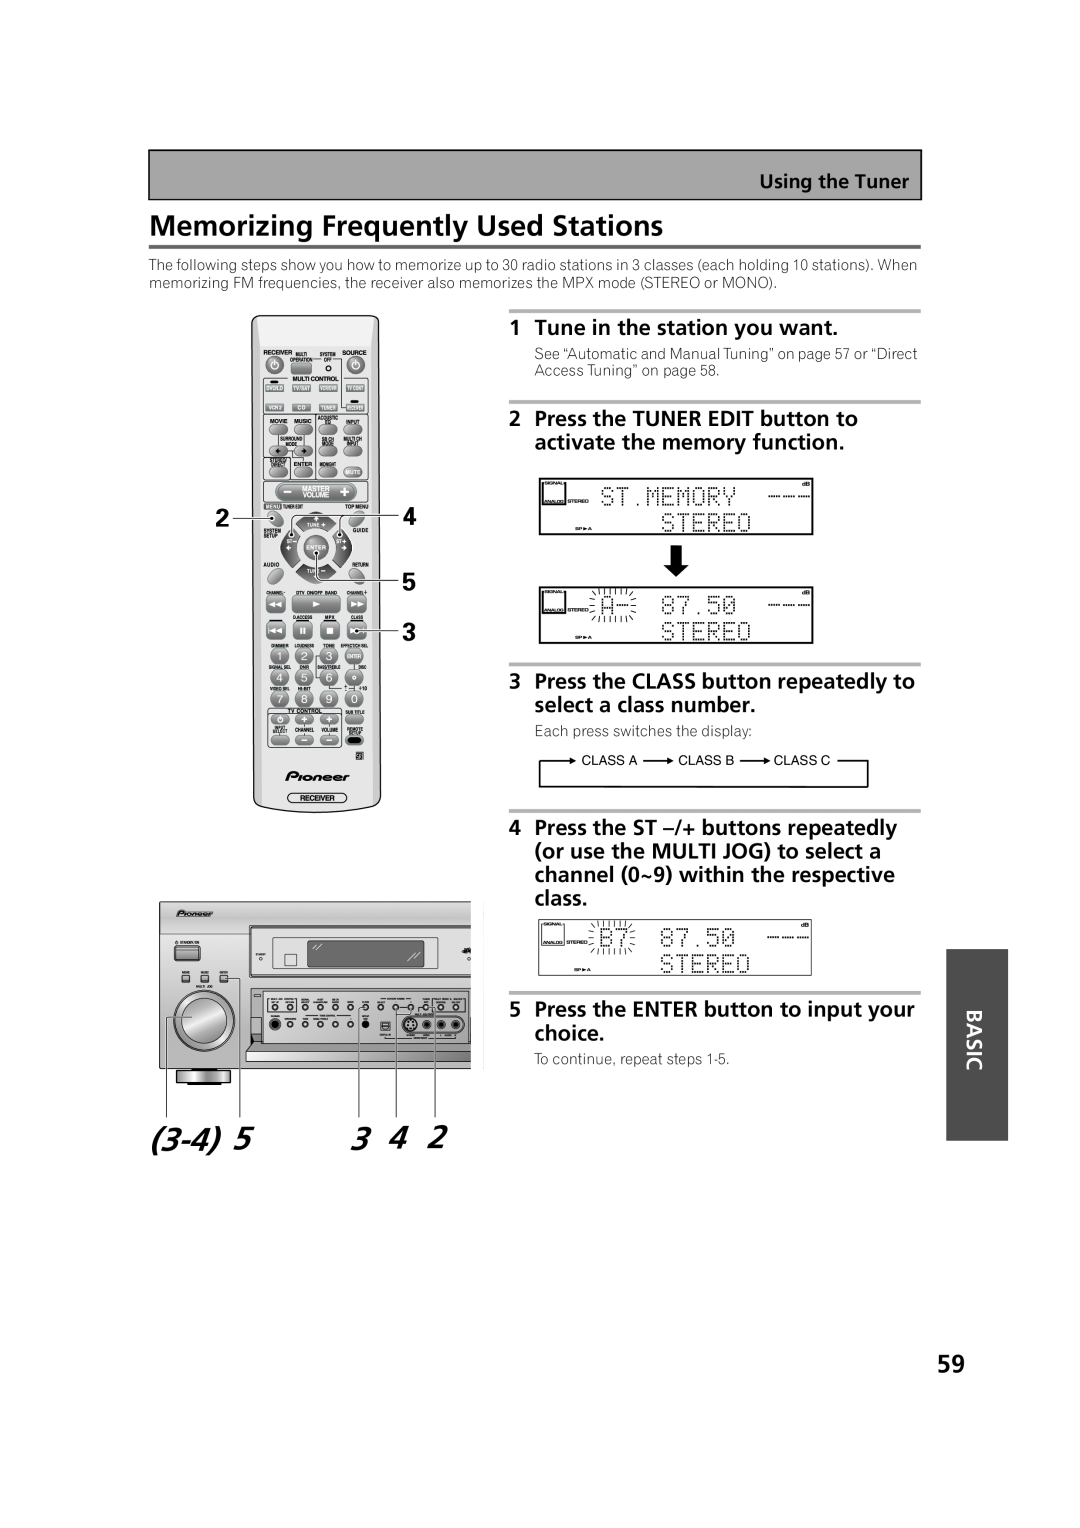 Pioneer VSX-53TX manual 3-45, Memorizing Frequently Used Stations, Basic 